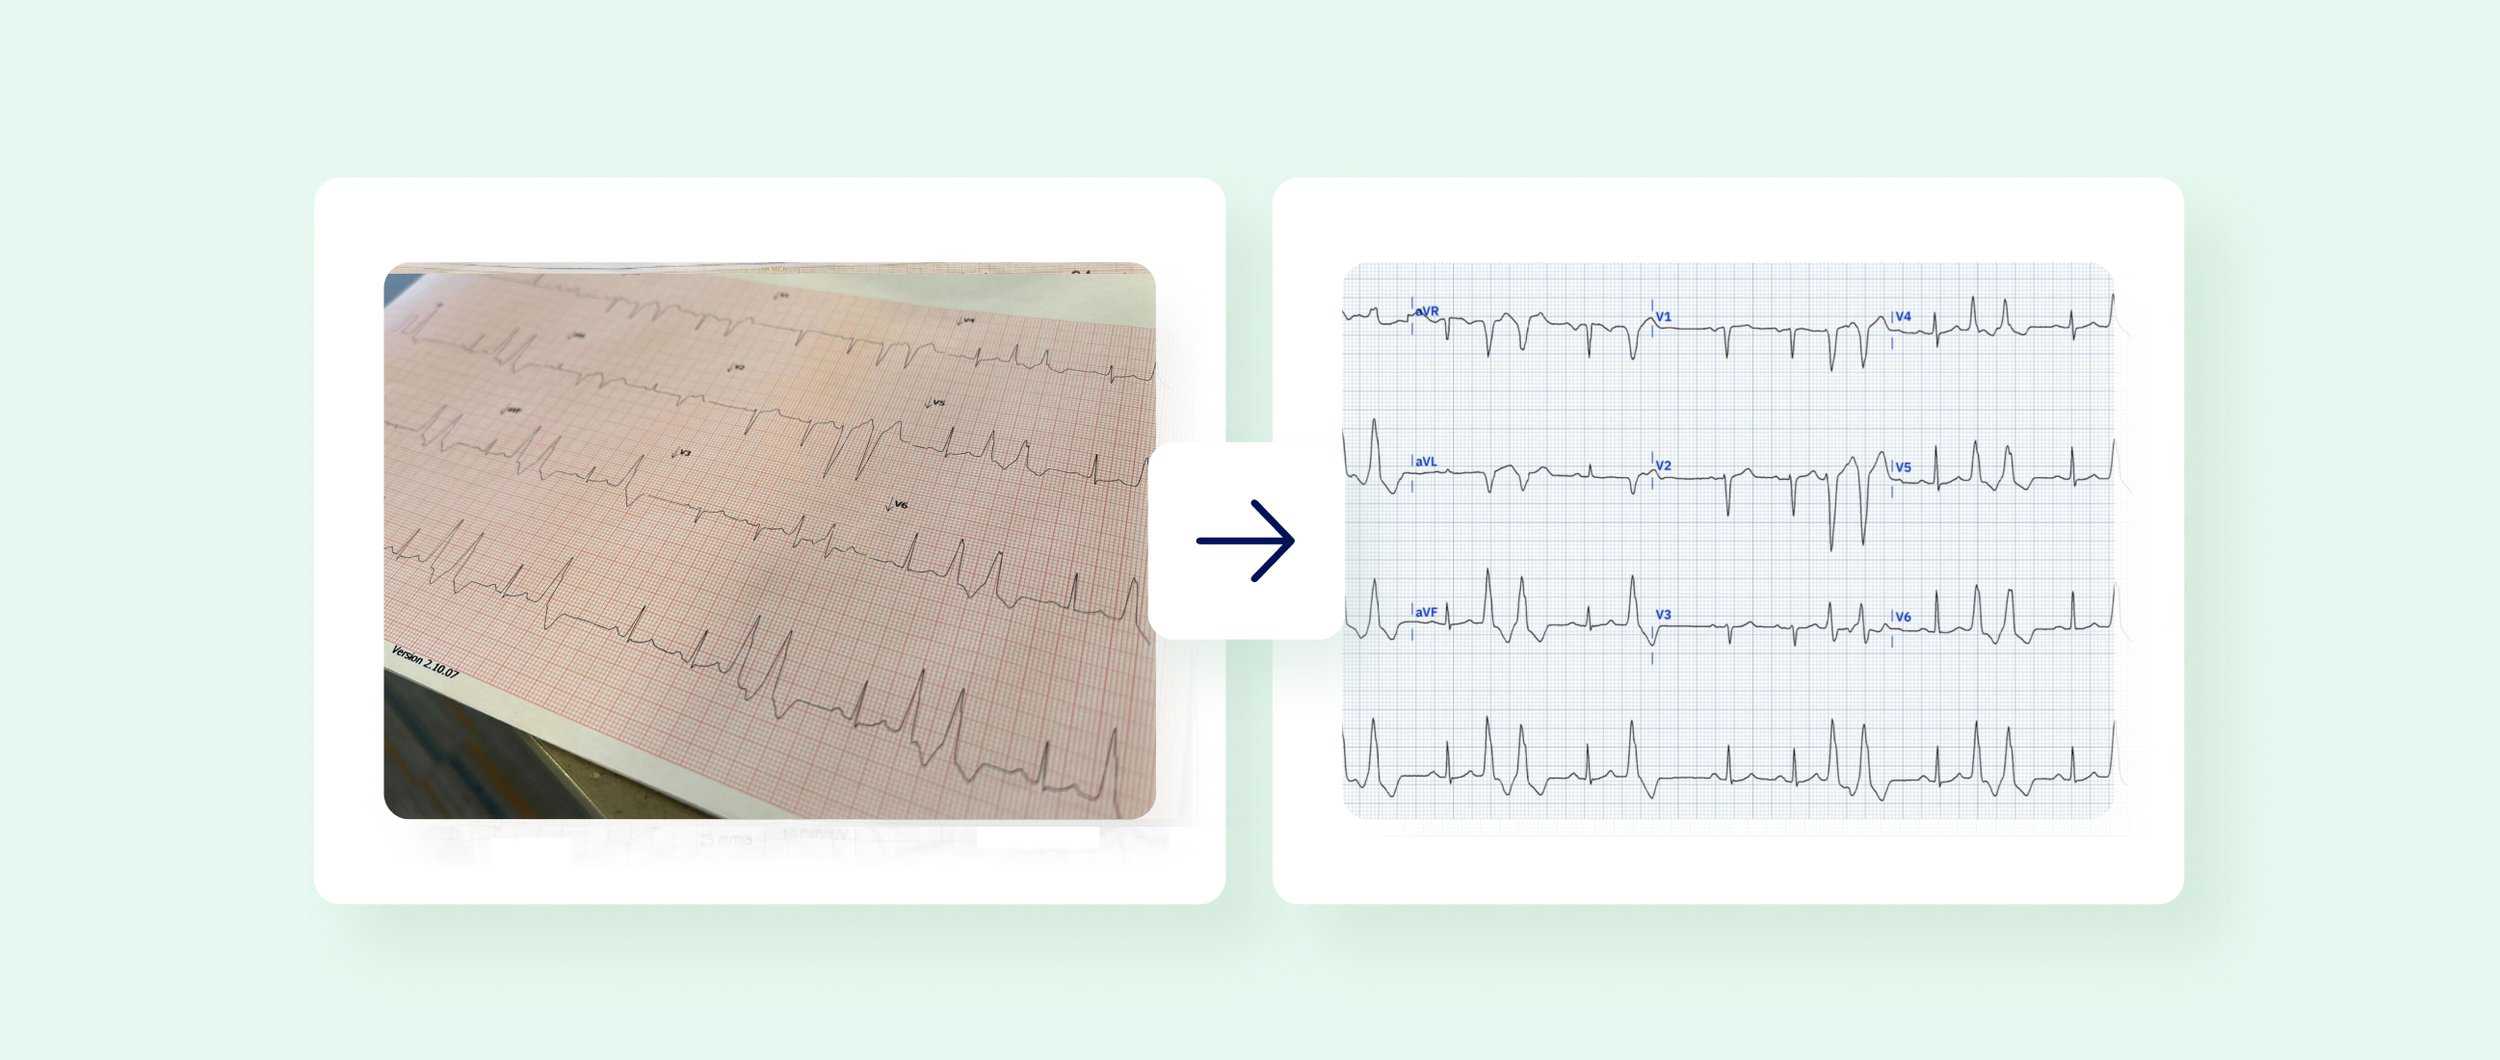 An image of a poor-quality ECG taken from an awkward angle and next to it a corrected ECG recording digitized by PMcardio